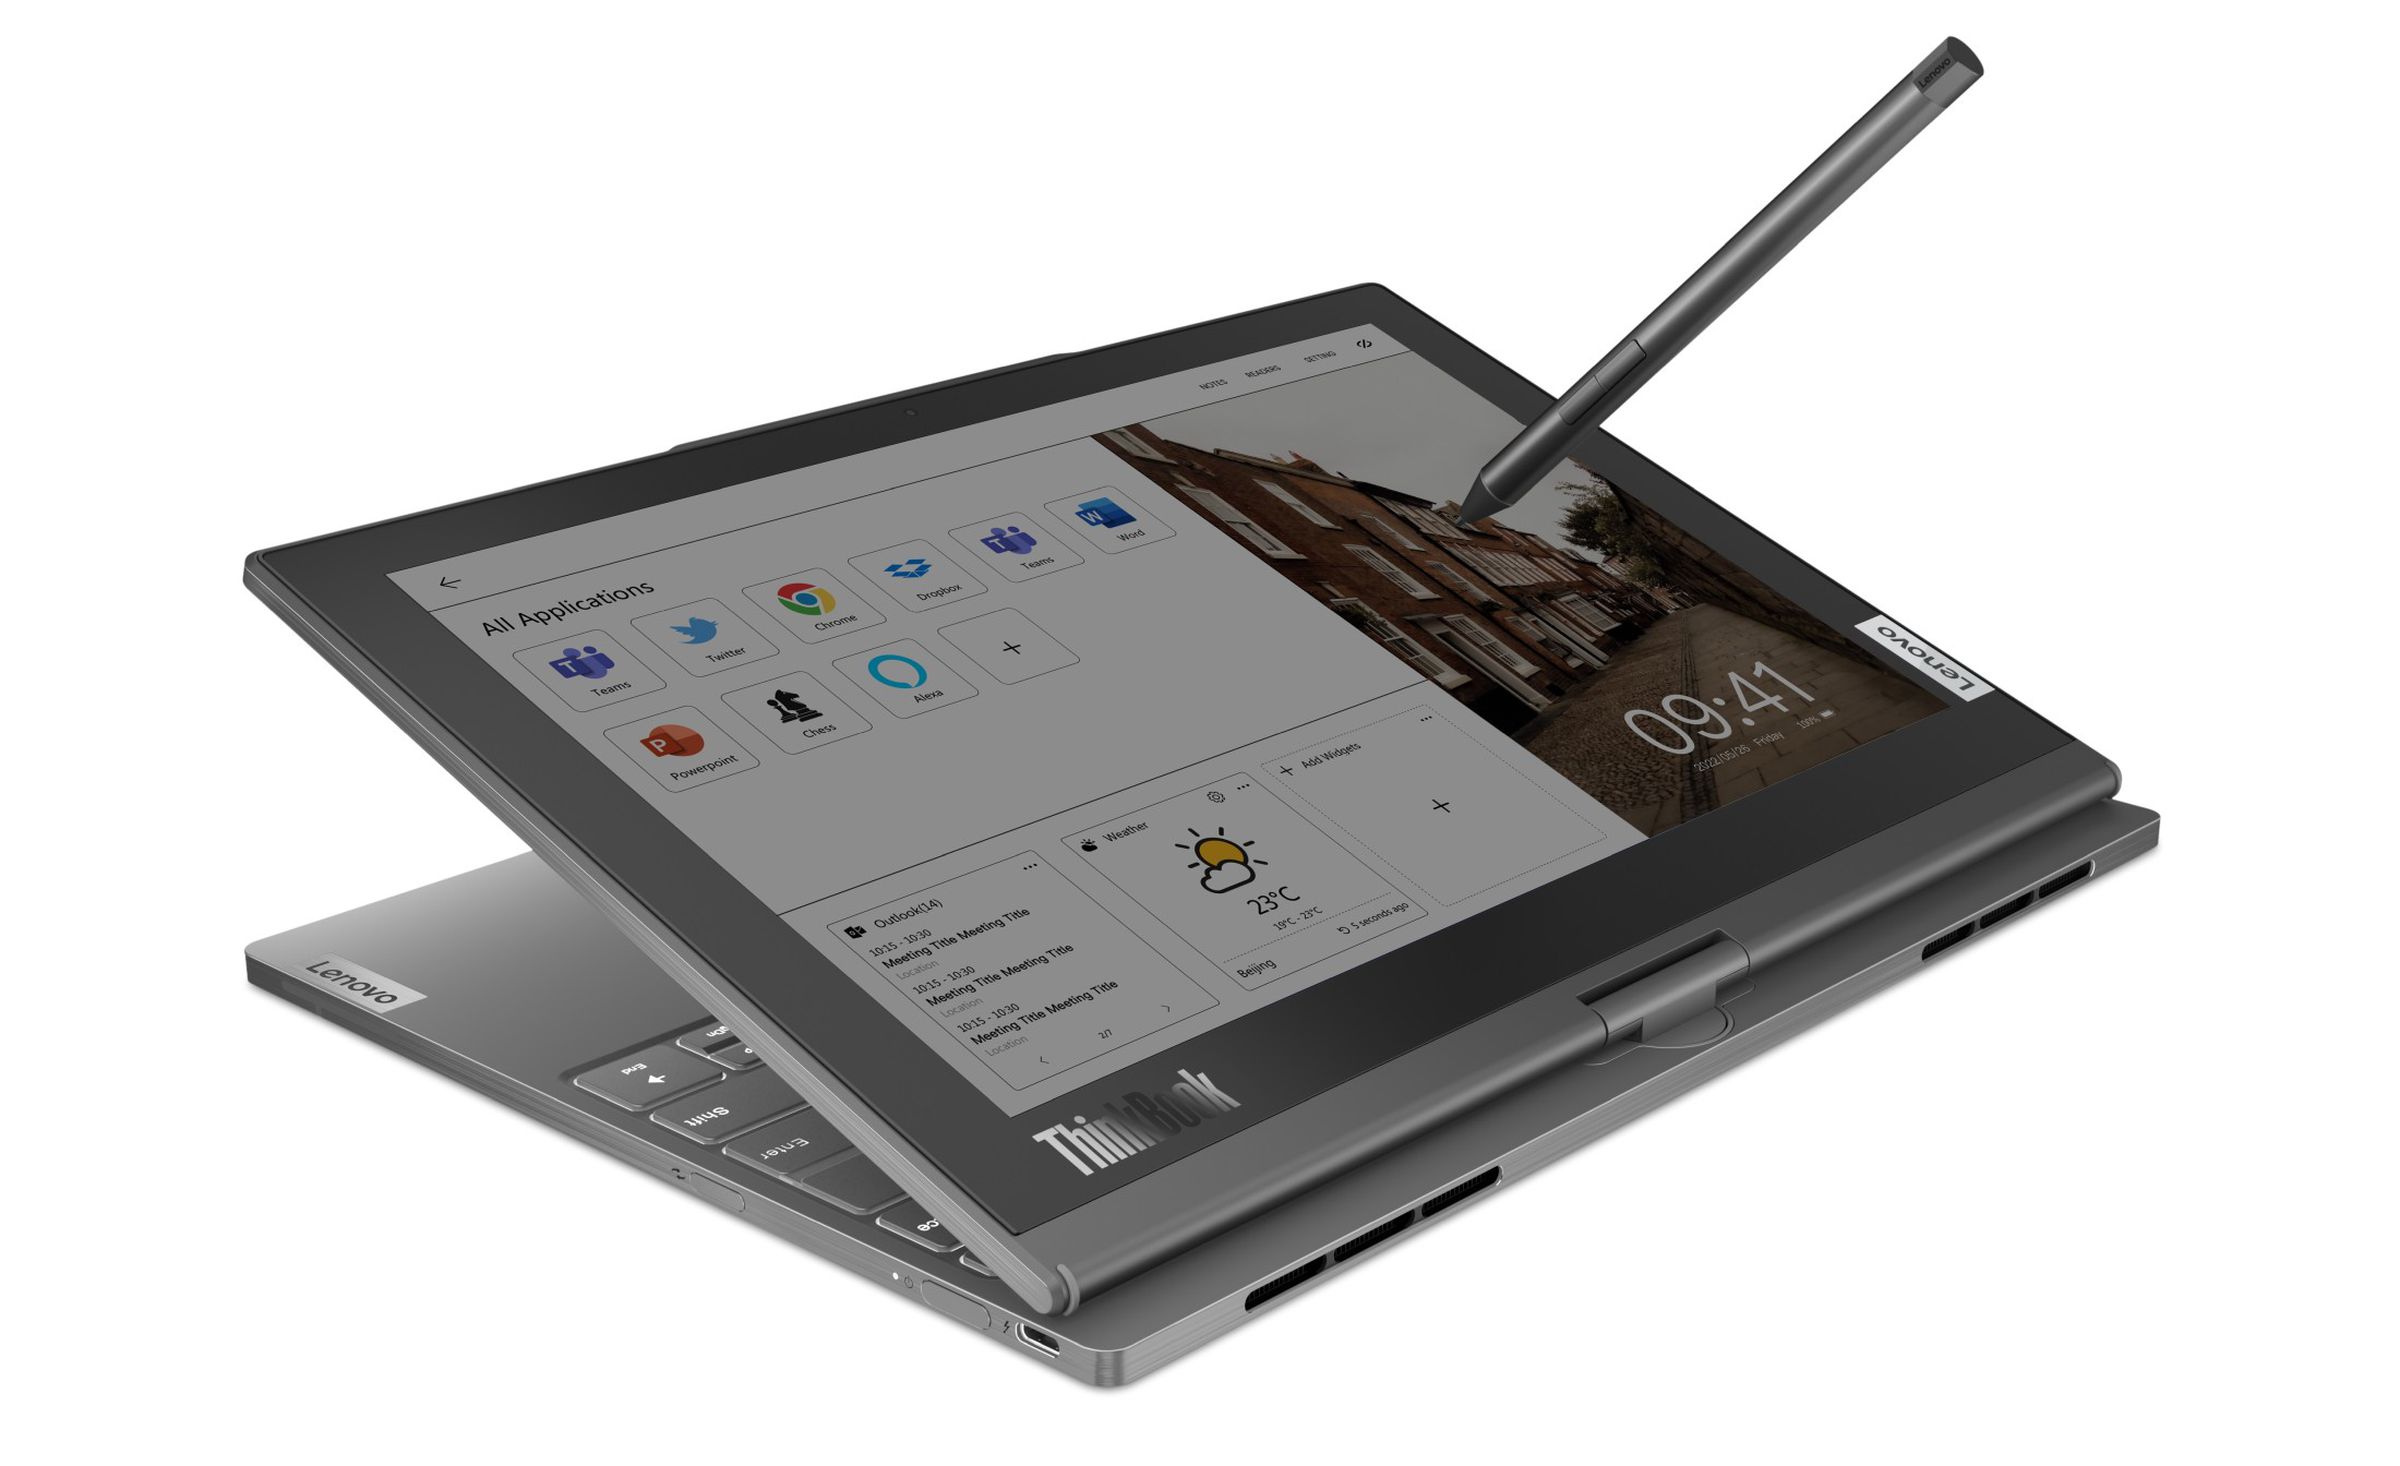 The e-ink side also accepts a pen.